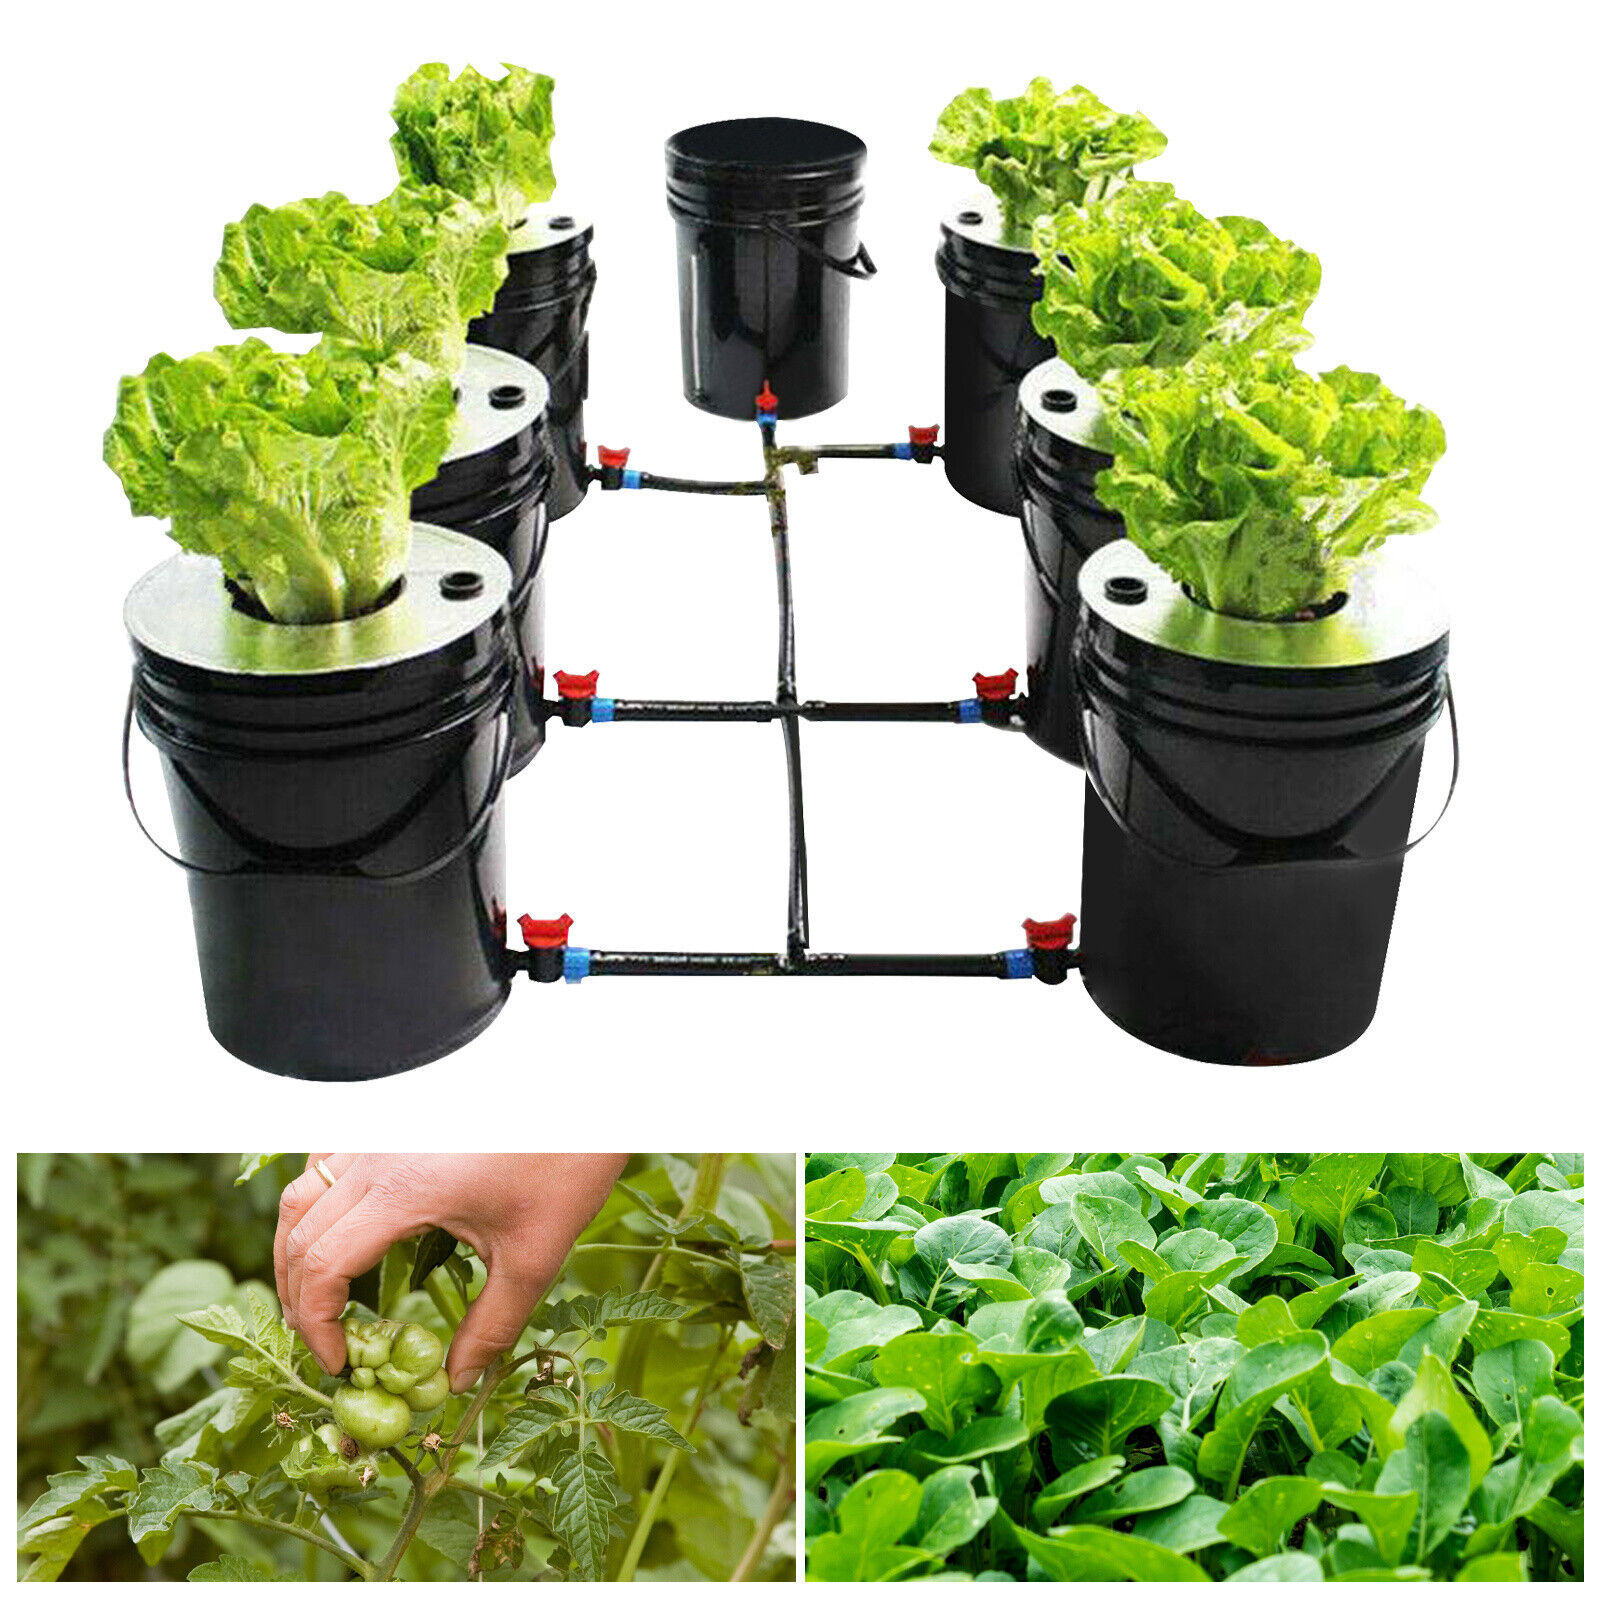 DWC Hydroponic Vegetable Growth System (1+6) x 5 Gal. Bucket for Indoor&Outdoor